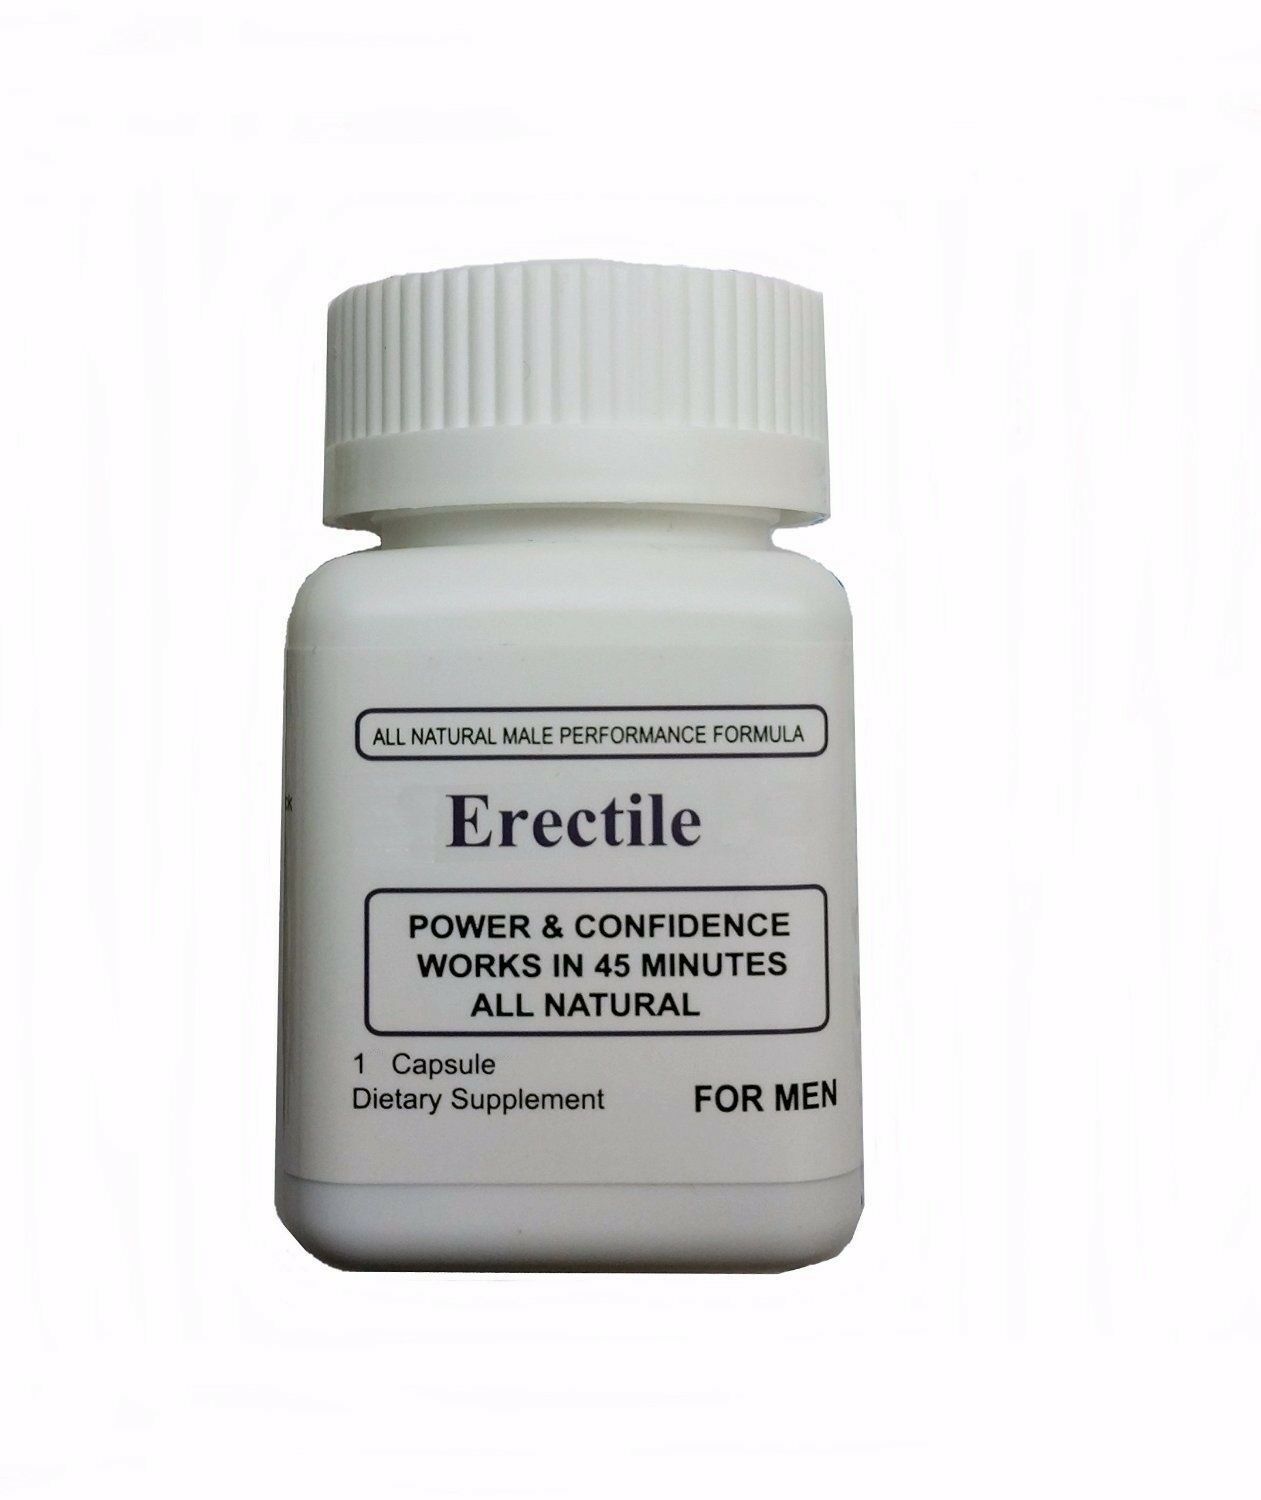 Erectile Testosterone Booster Male Enhancing Performance Pill - 12 Count